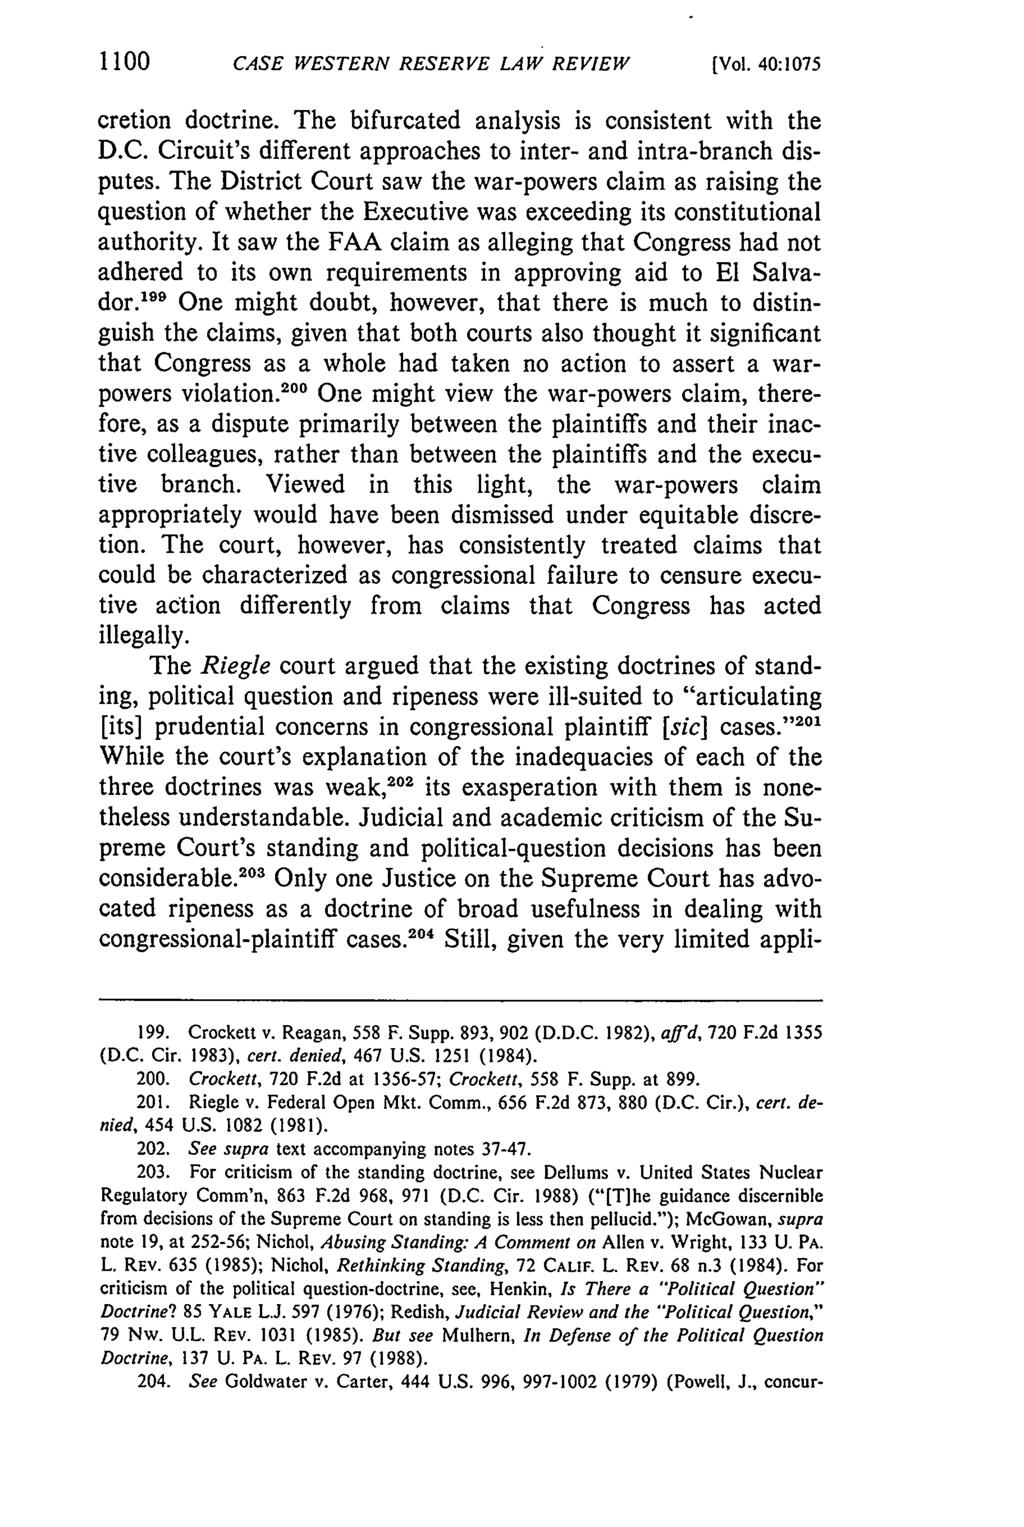 1100 CASE WESTERN RESERVE LAW REVIEW [Vol. 40:1075 cretion doctrine. The bifurcated analysis is consistent with the D.C. Circuit's different approaches to inter- and intra-branch disputes.